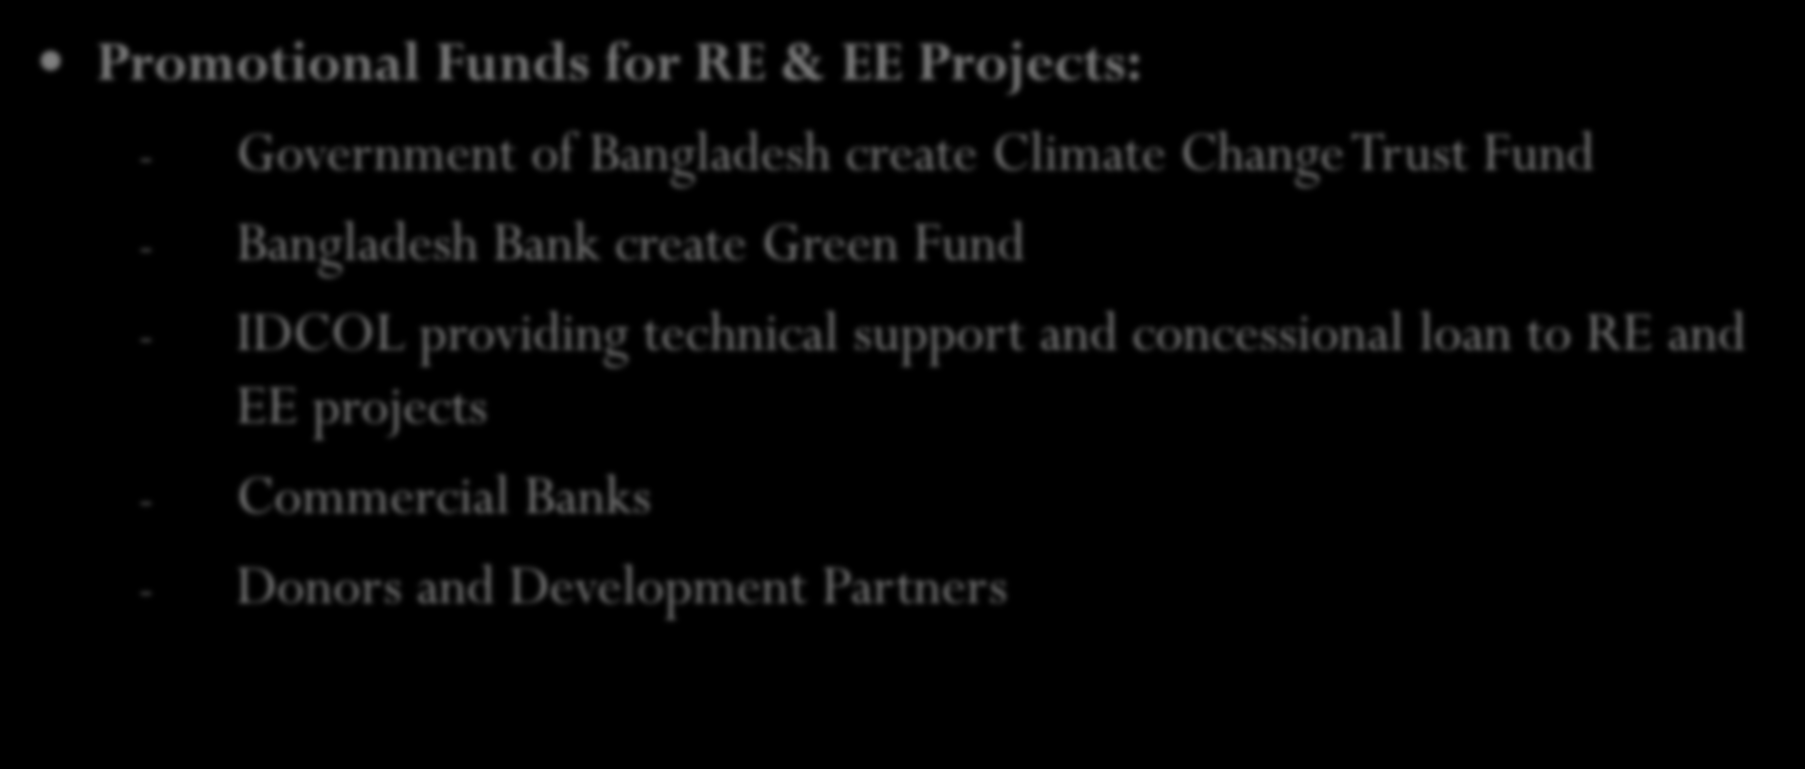 Existing Incentives from Government Promotional Funds for RE & EE Projects: - Government of Bangladesh create Climate Change Trust Fund - Bangladesh